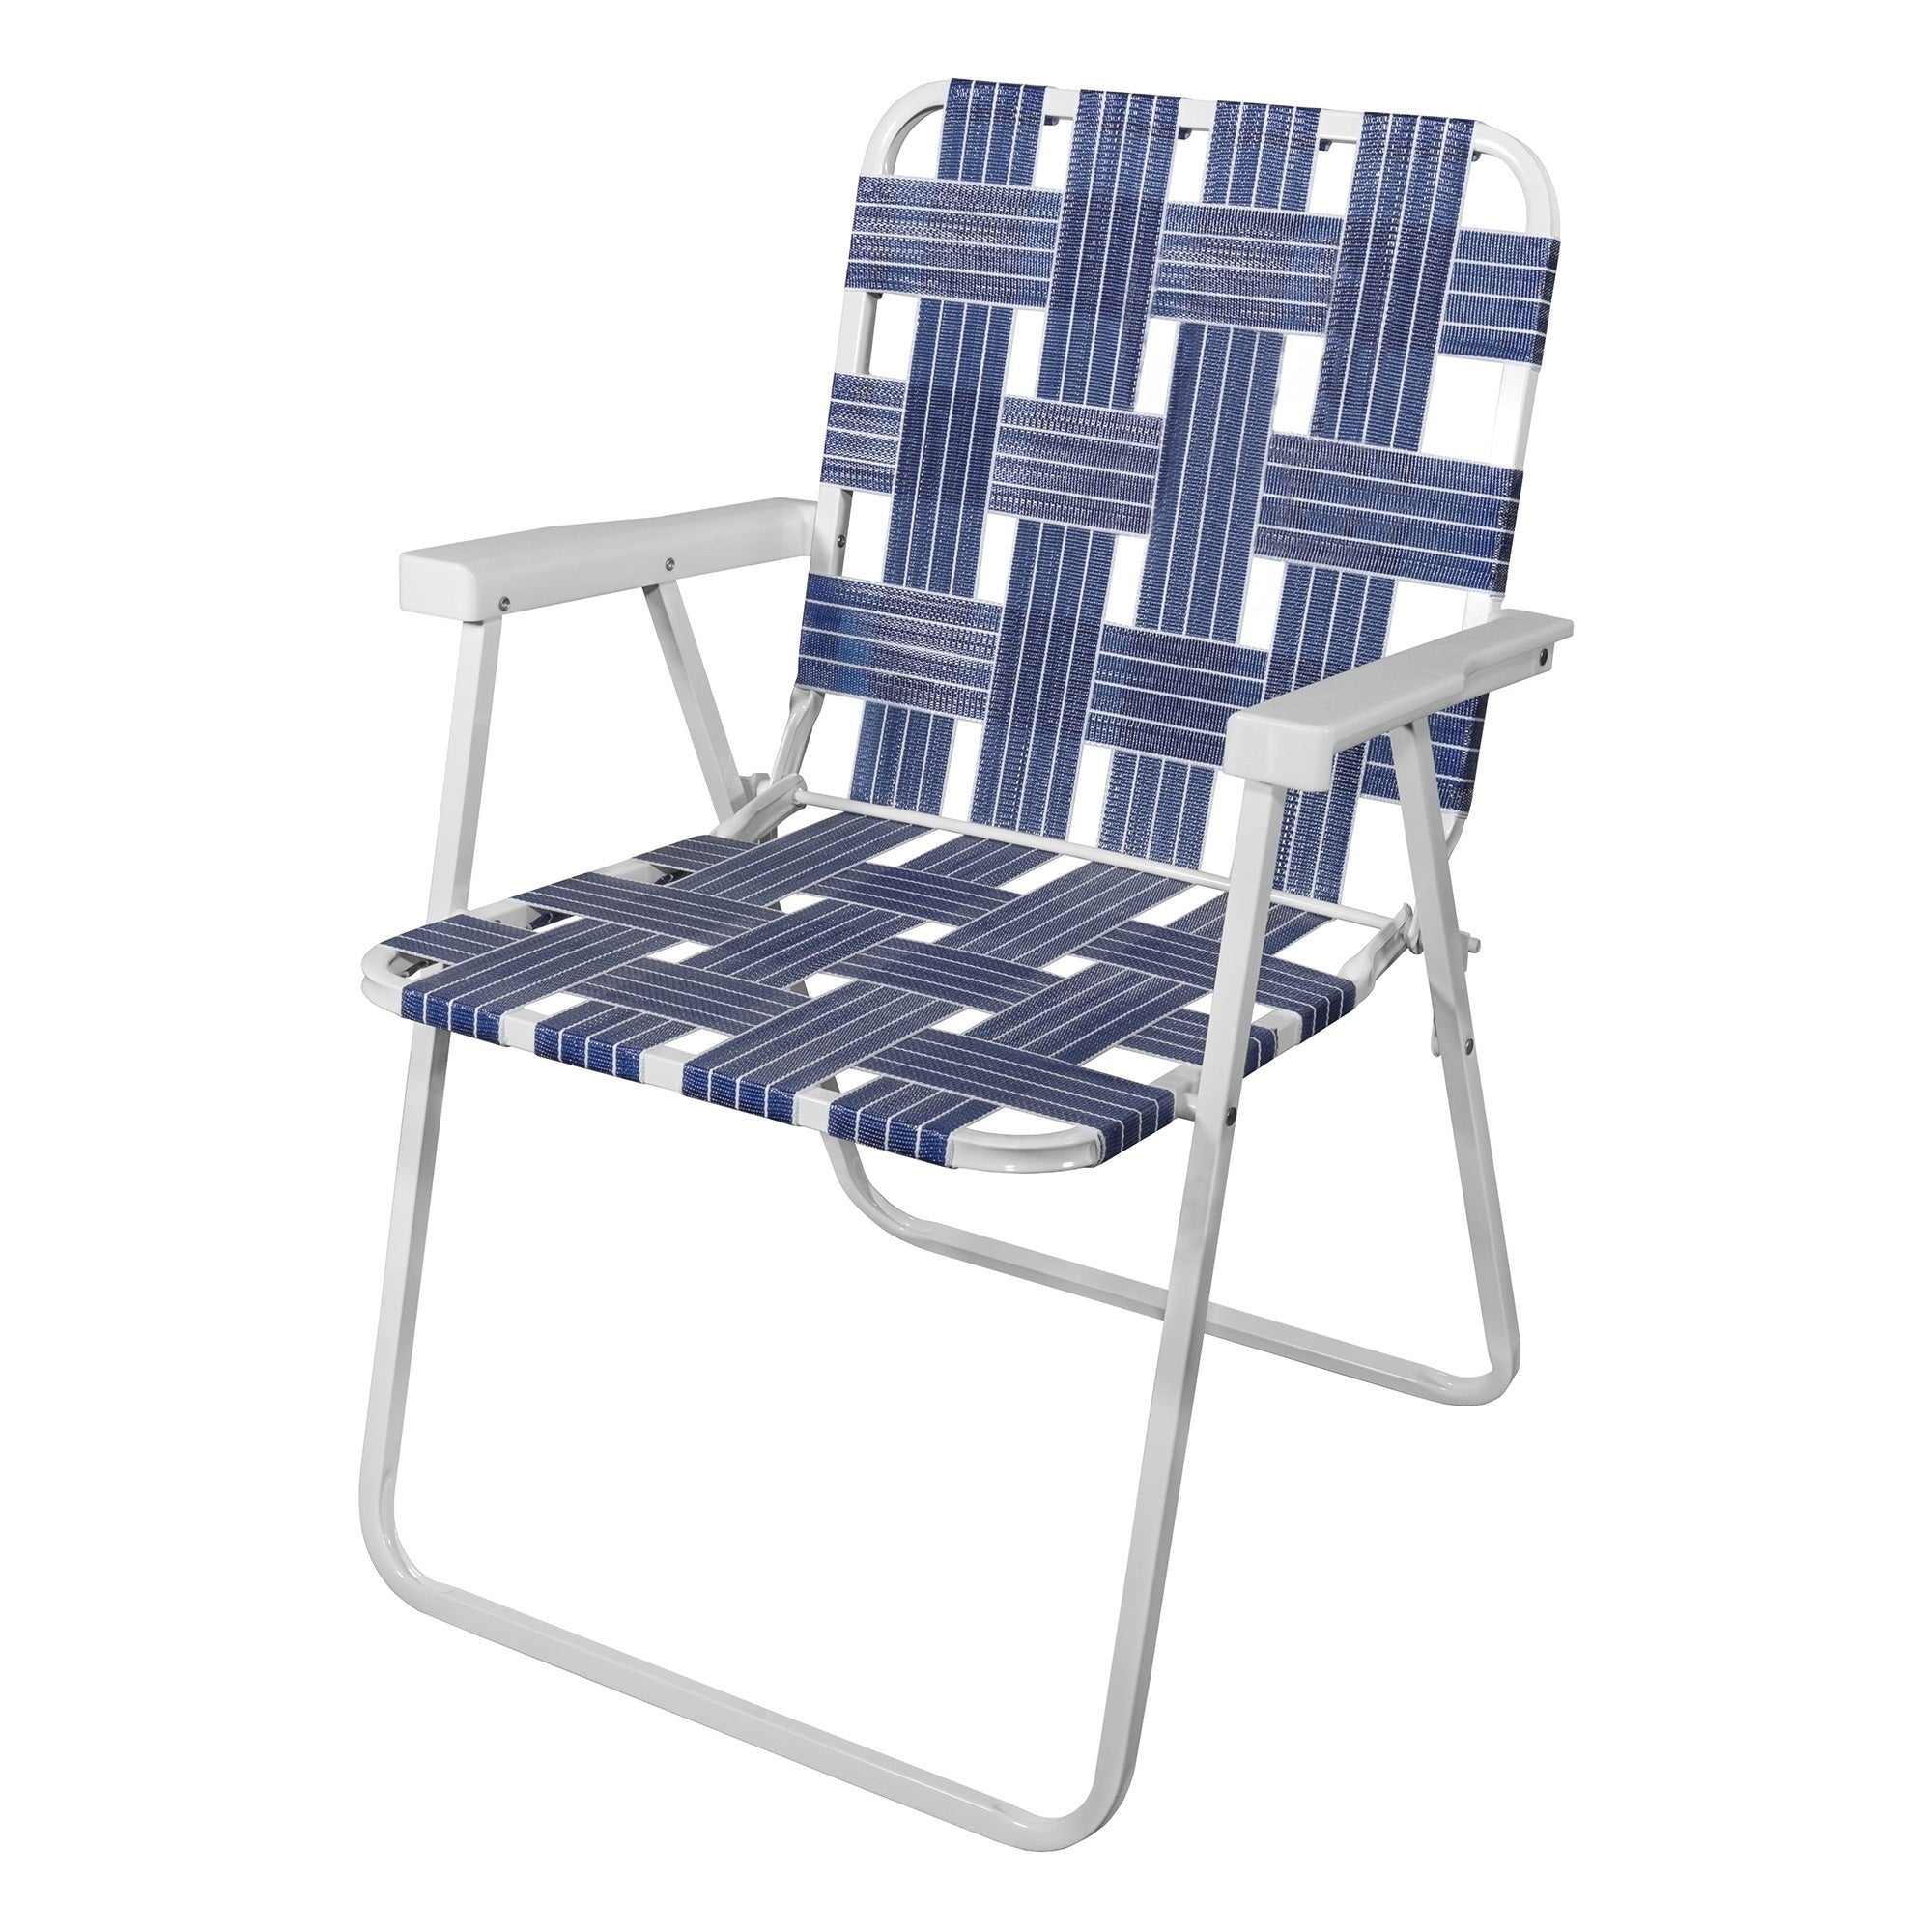 RIO Gear Camp and Go Portable Folding Web Chair For Camping, Beach, White Steel Frame, Blue Webbing